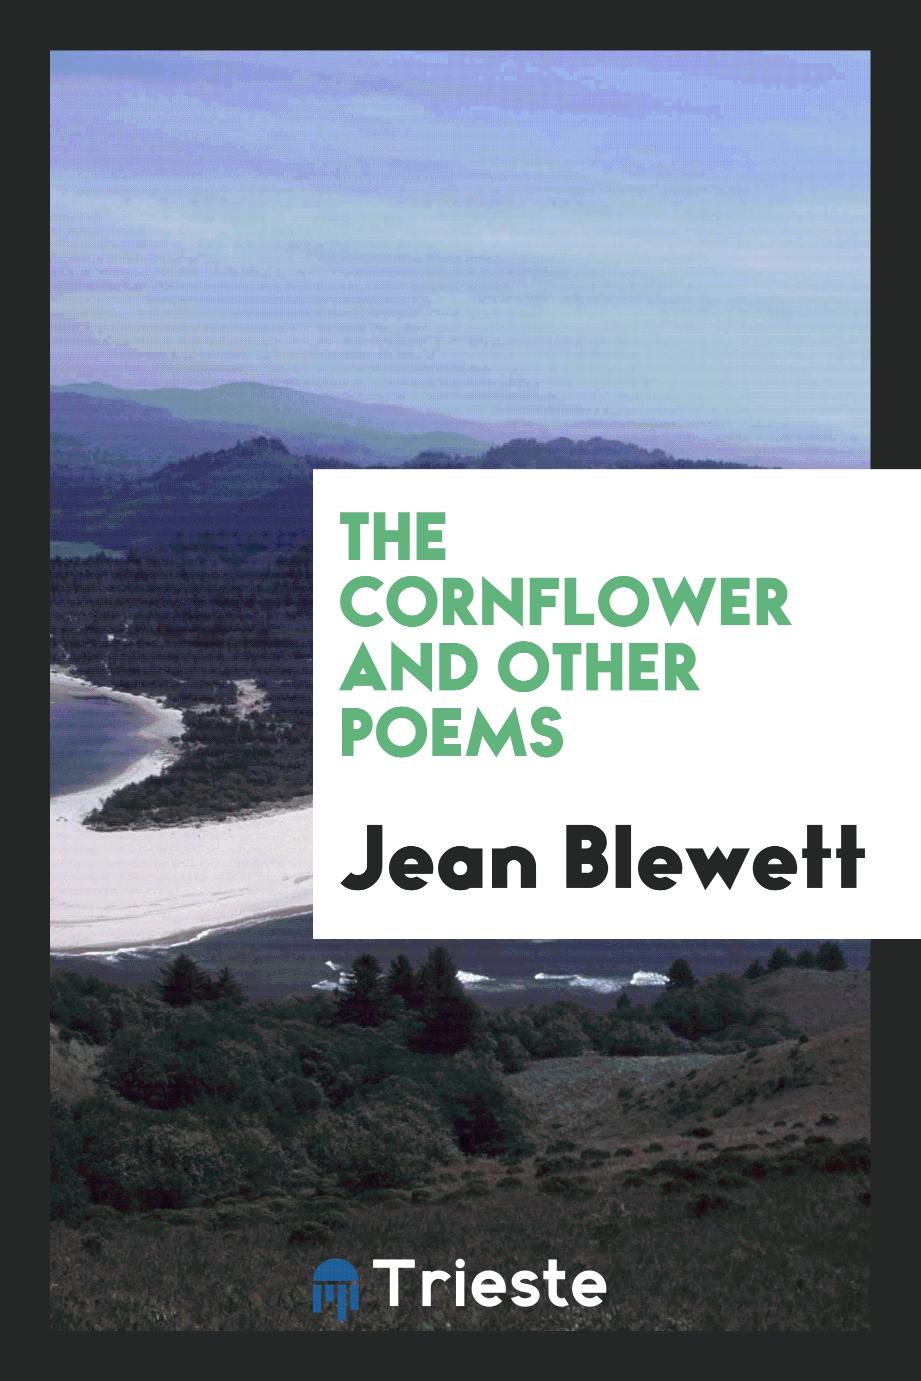 The cornflower and other poems